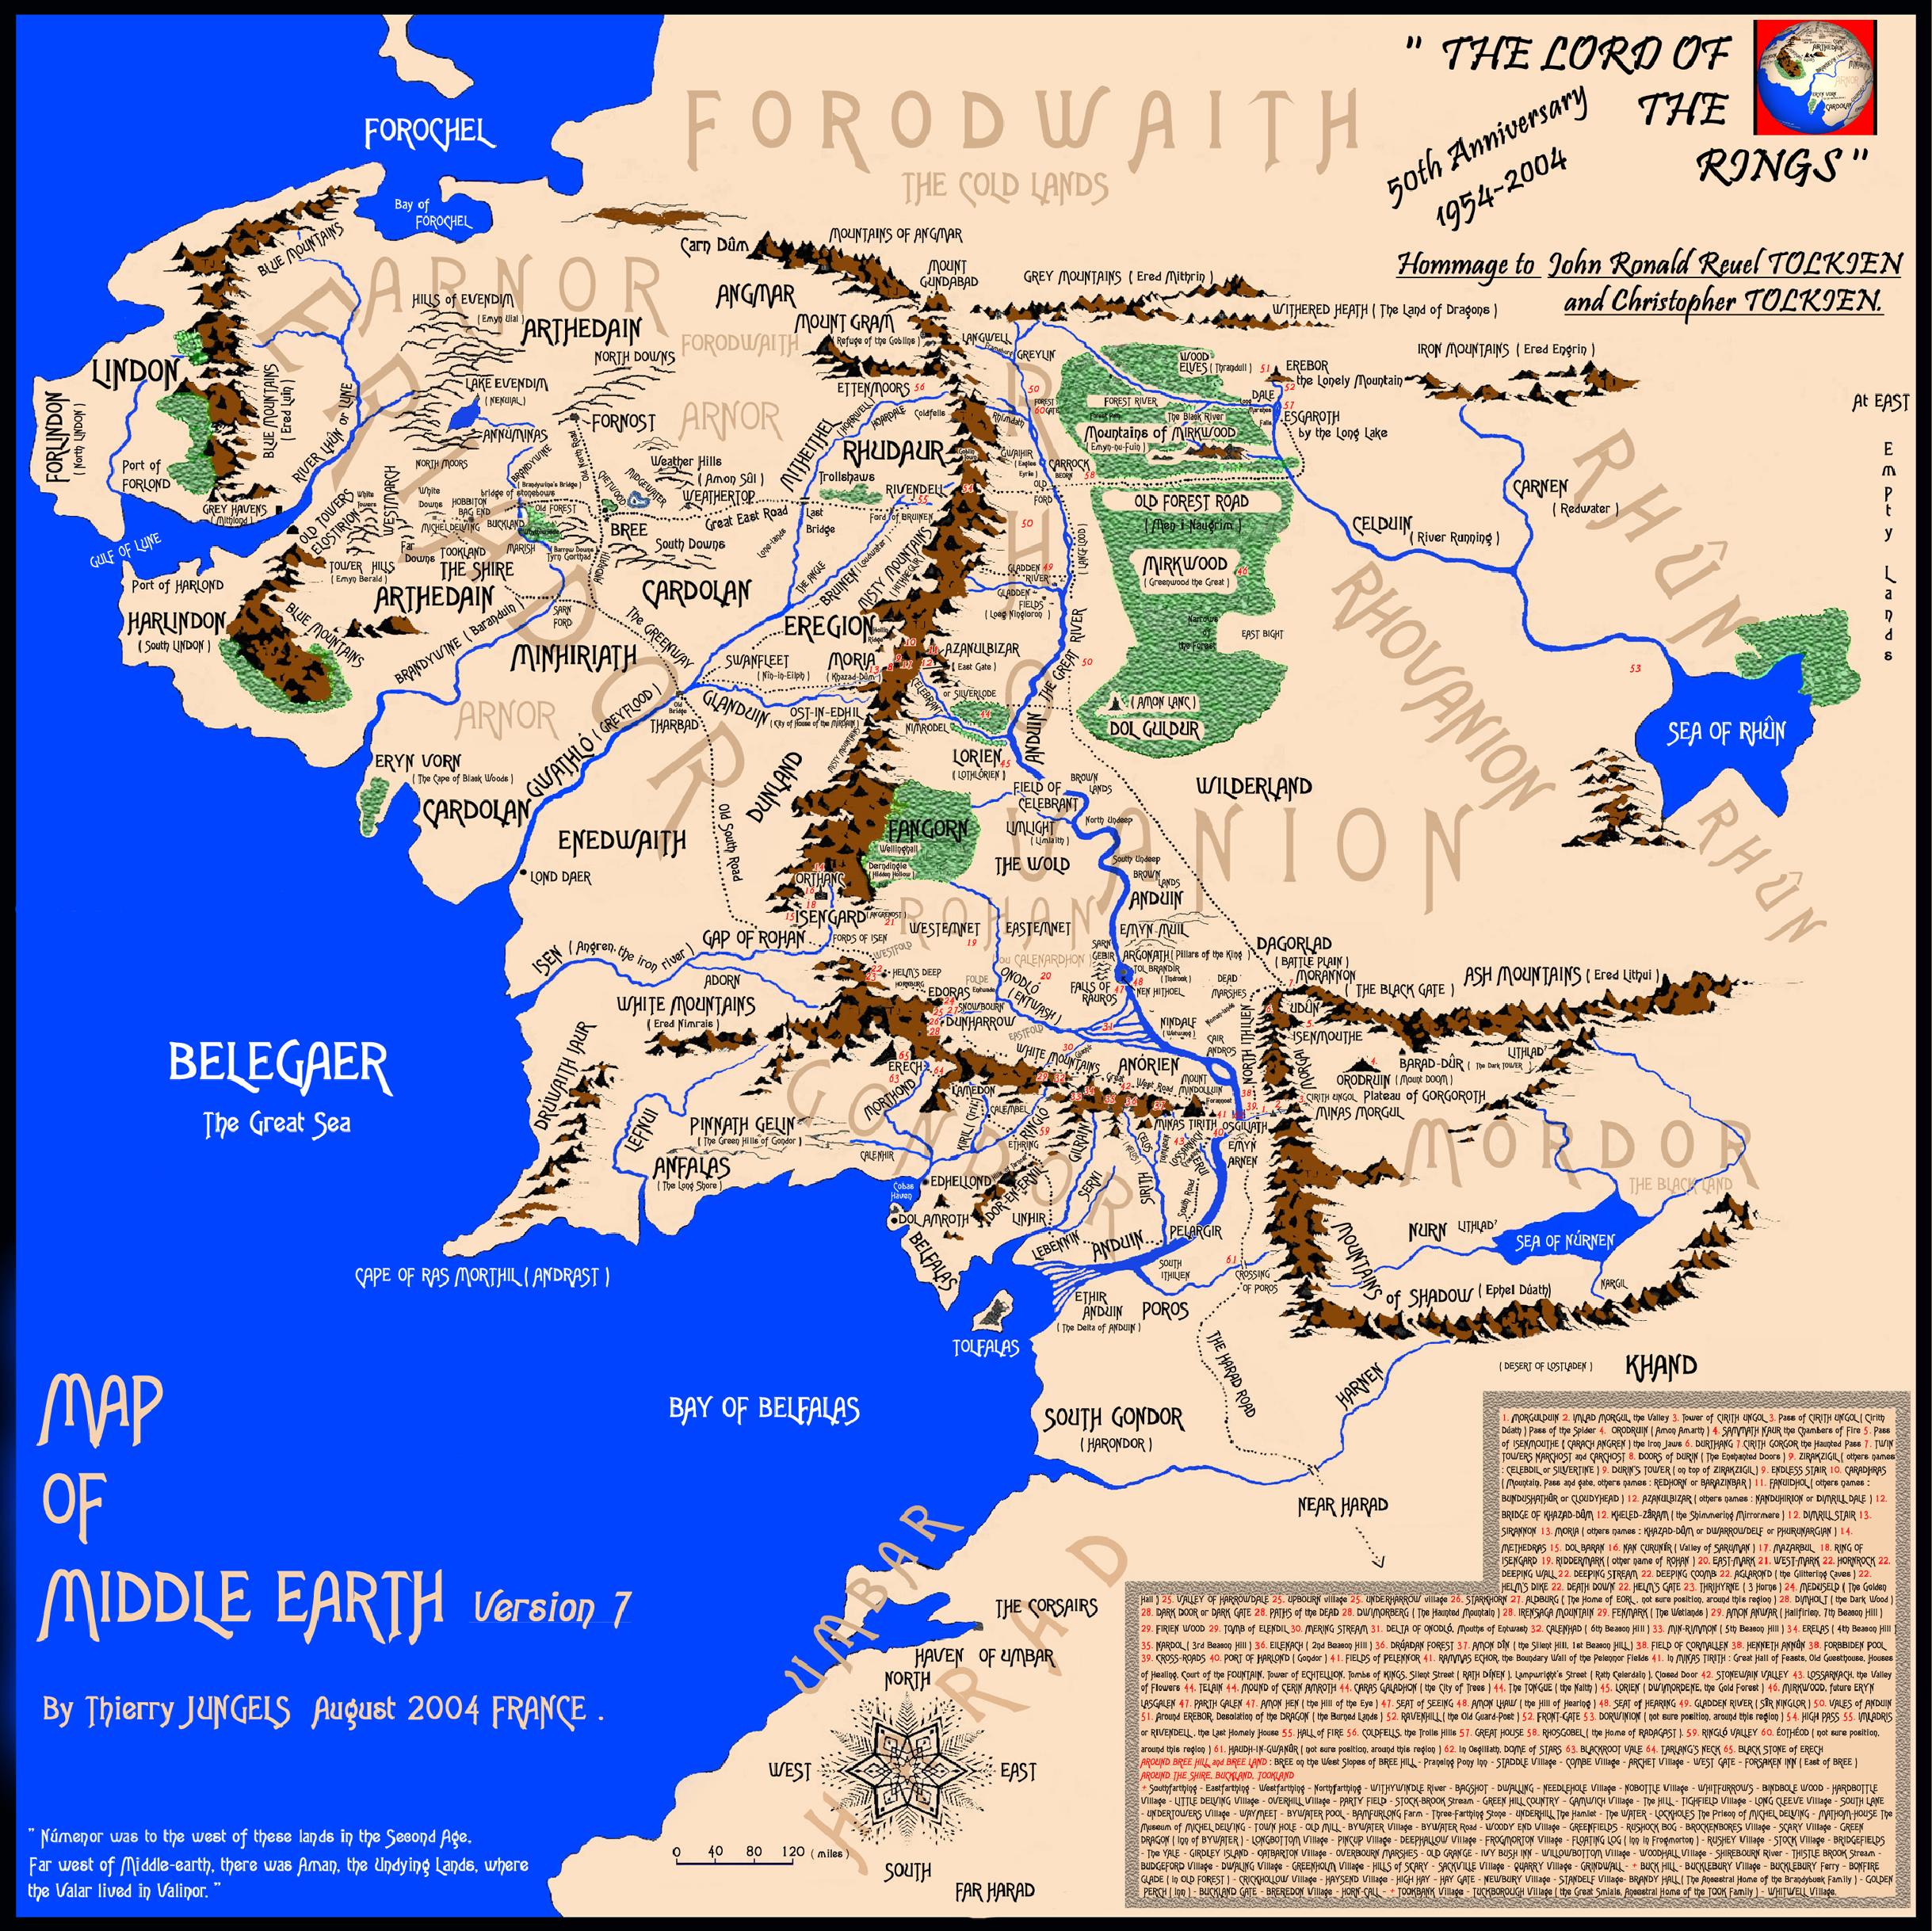 MAP-OF-MIDDLE-EARTH-VERSION-7.jpg